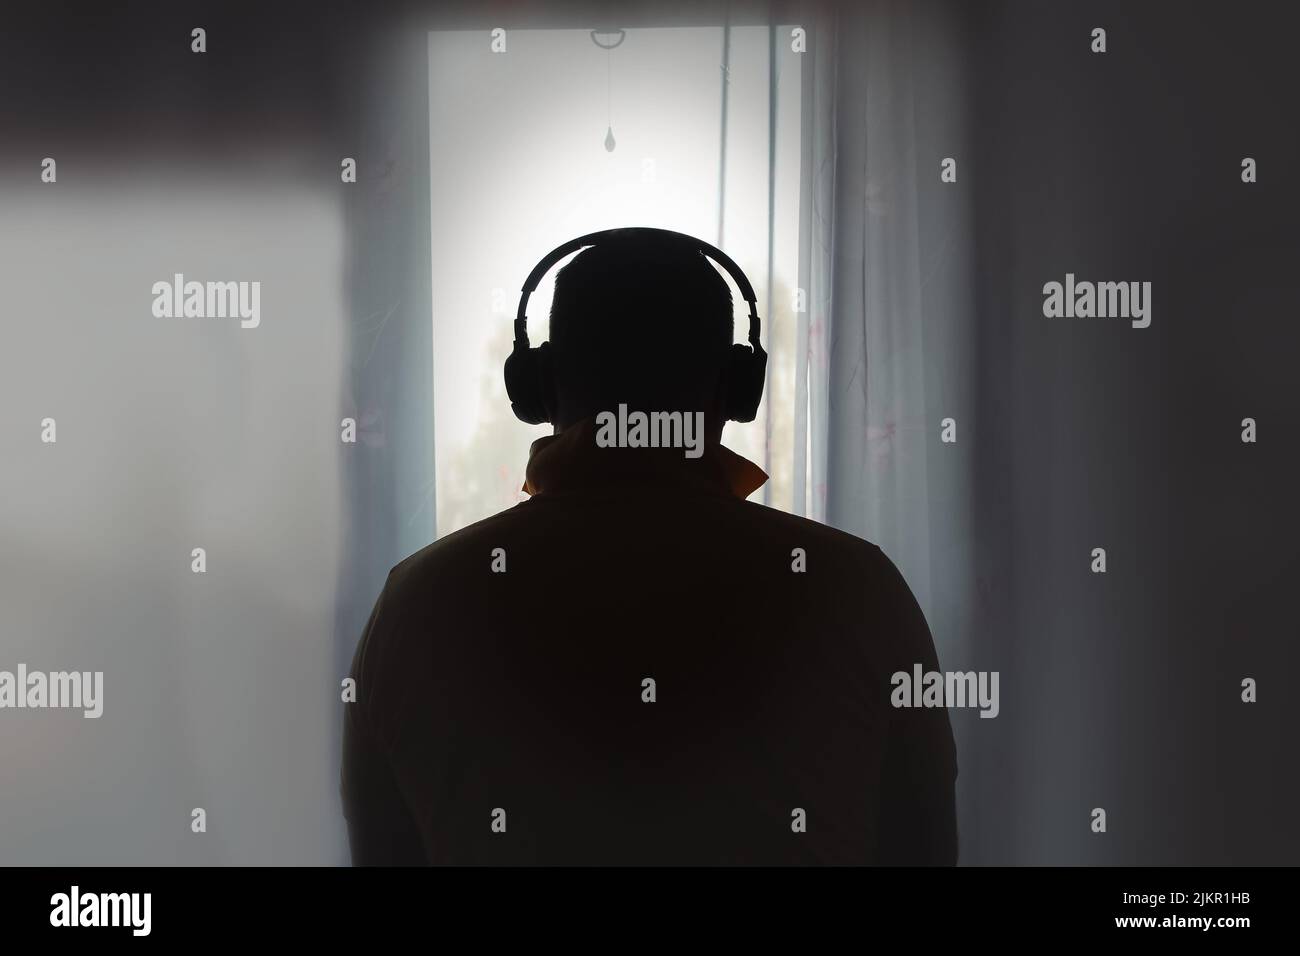 Man In Headphones Looks Out Window. Back View. Stock Photo